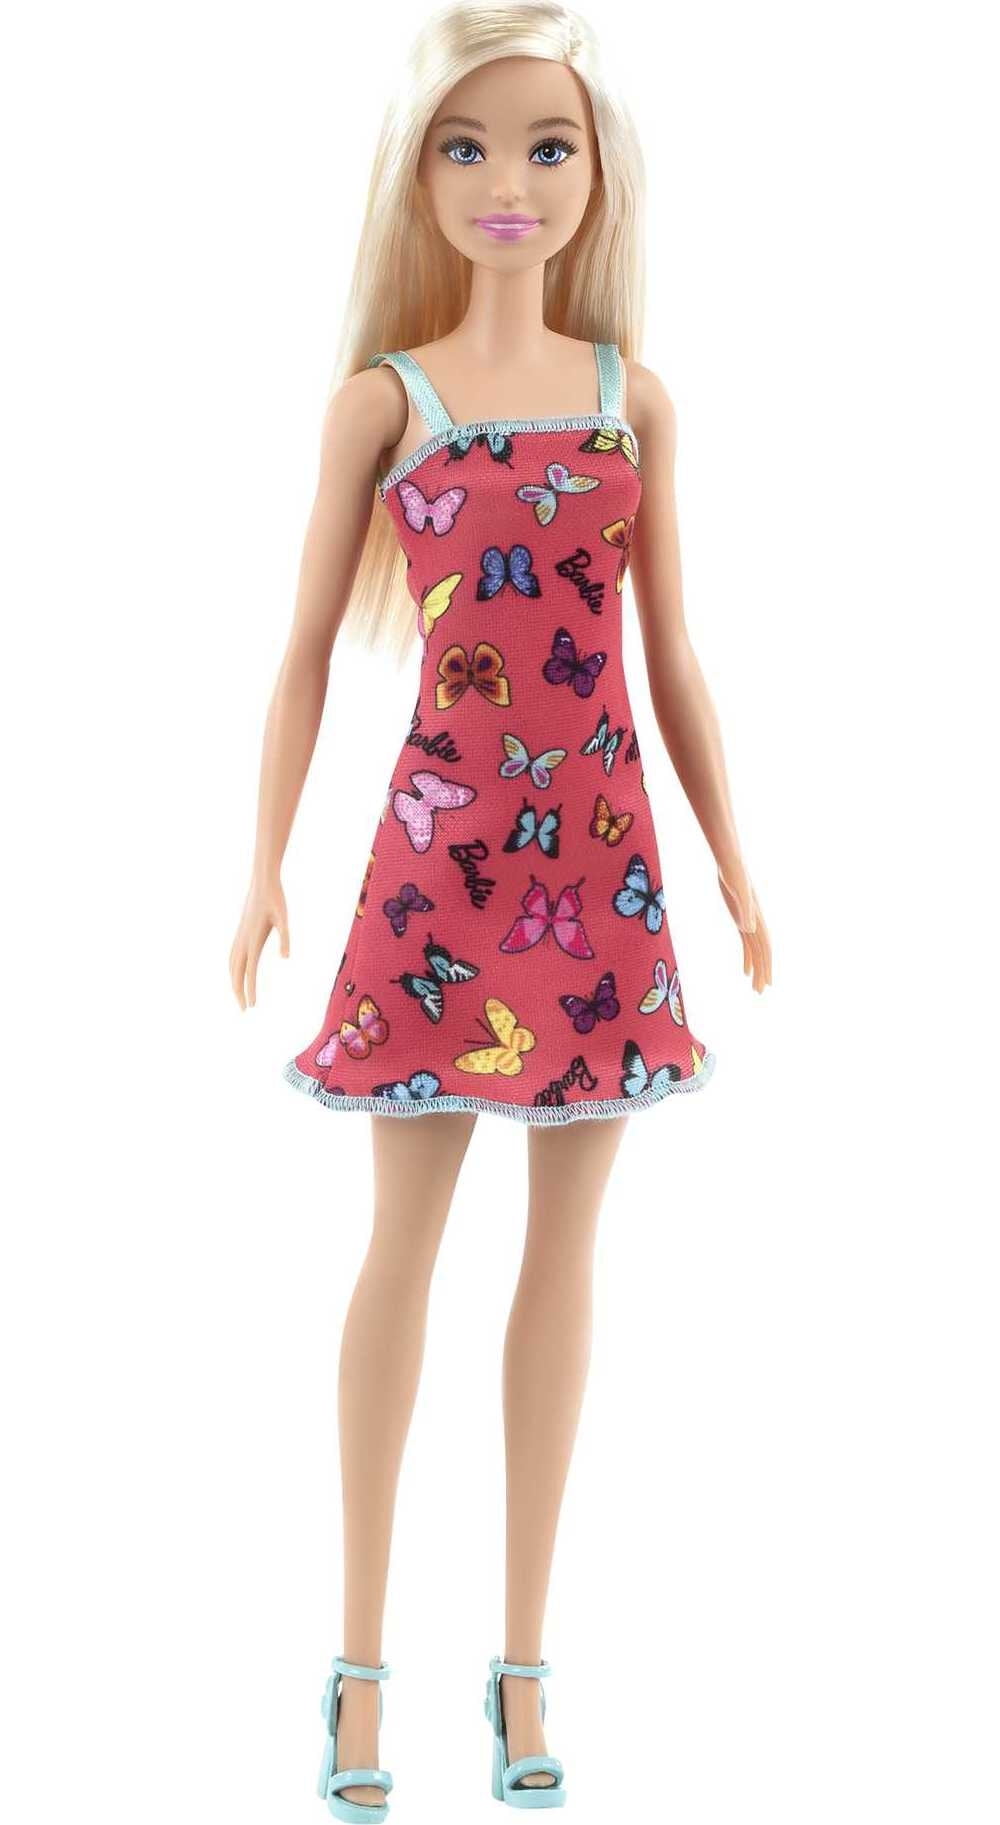 Barbie Fashion Doll with Blonde Hair Dressed in Colorful Butterfly Print Dress